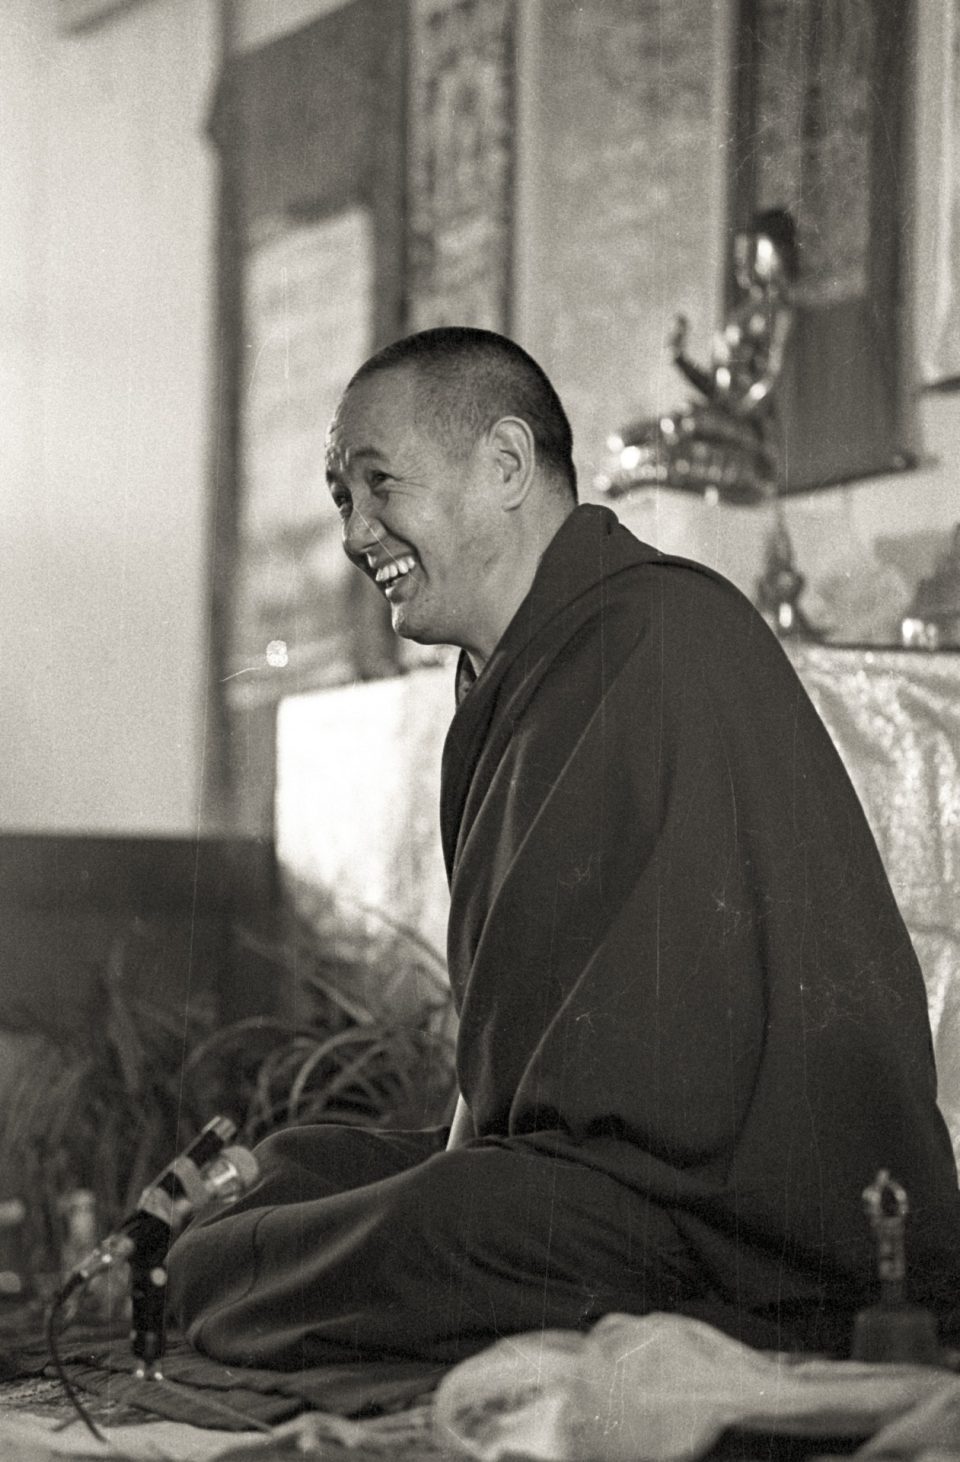 Lama Yeshe’s Wisdom: Making the Most of Your Life